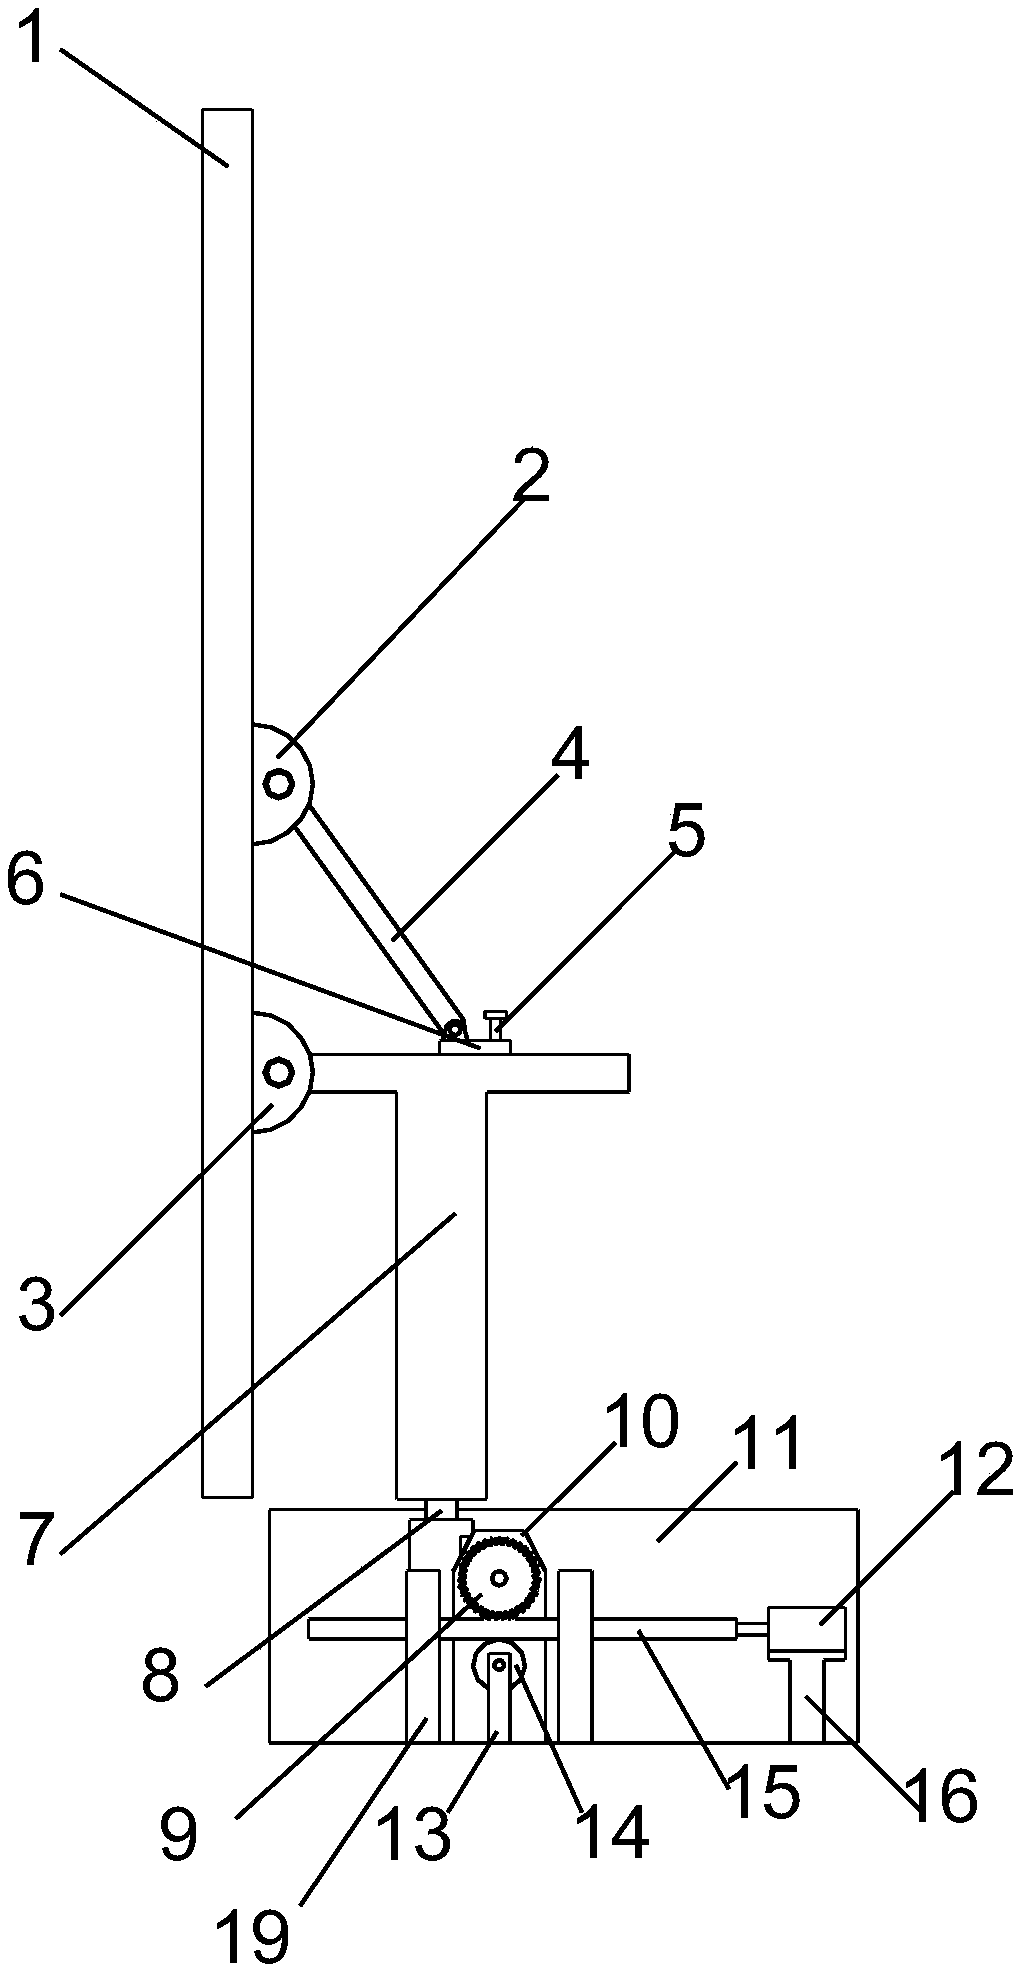 Display screen supporting frame with adjustable height and angle